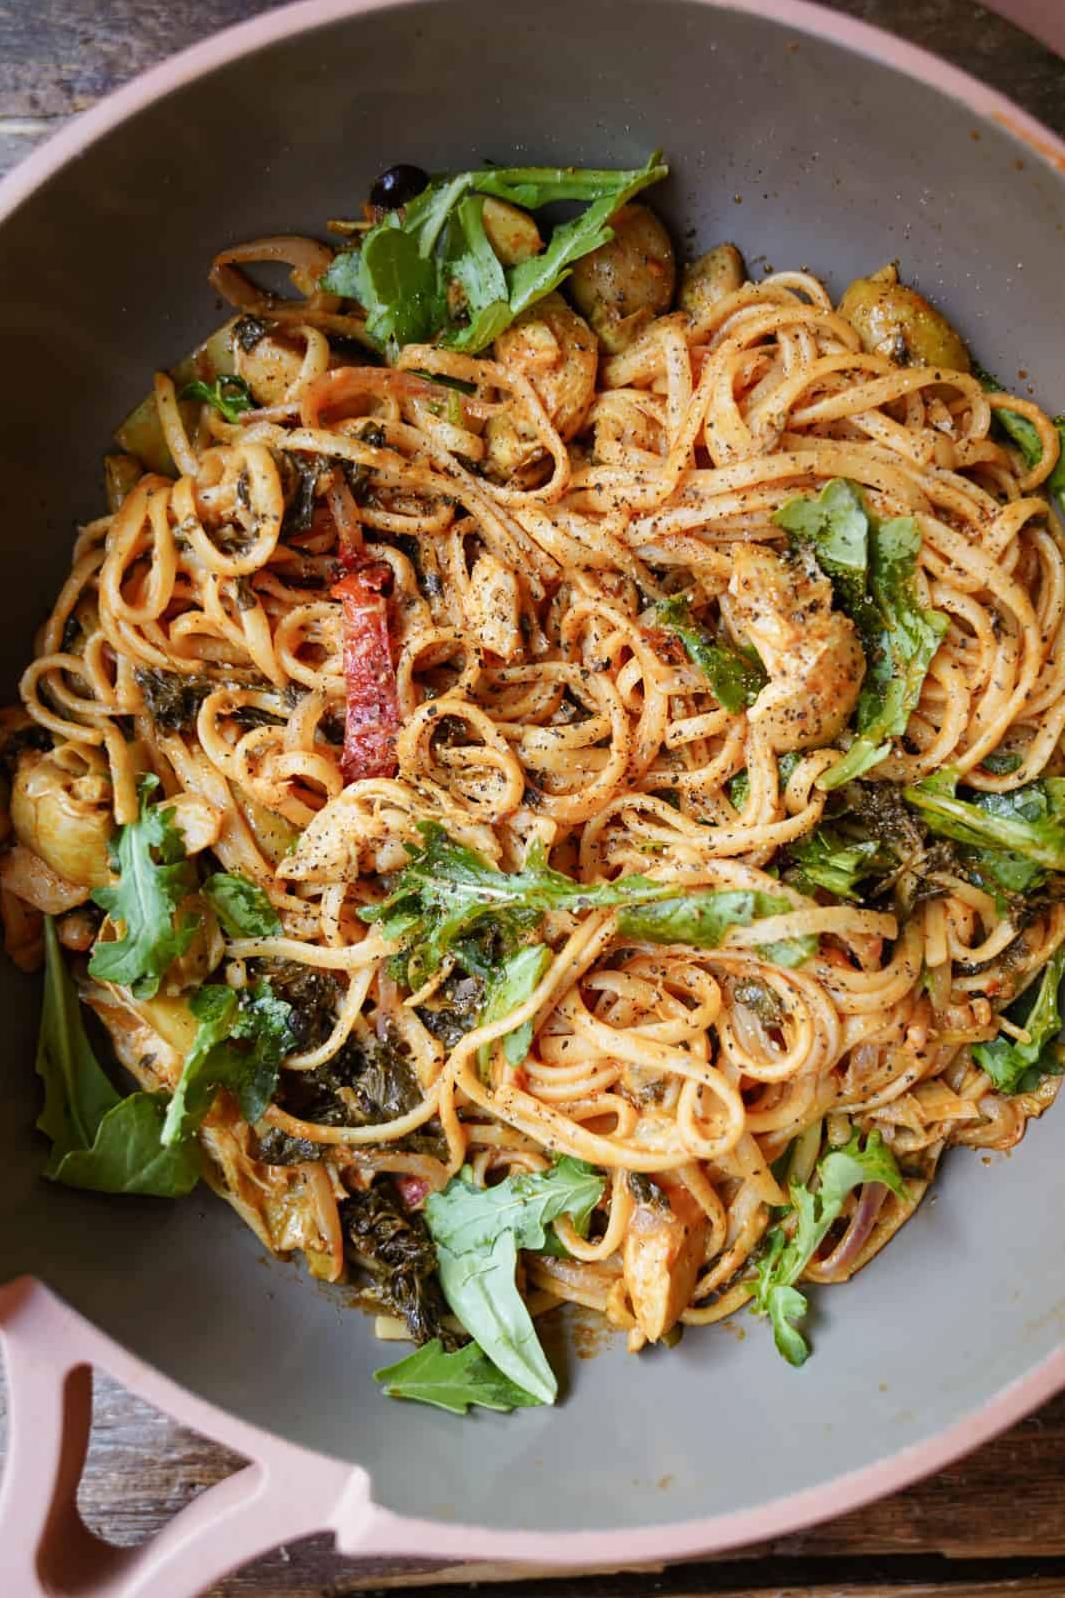  Take a break from complicated meals with this simple linguine.